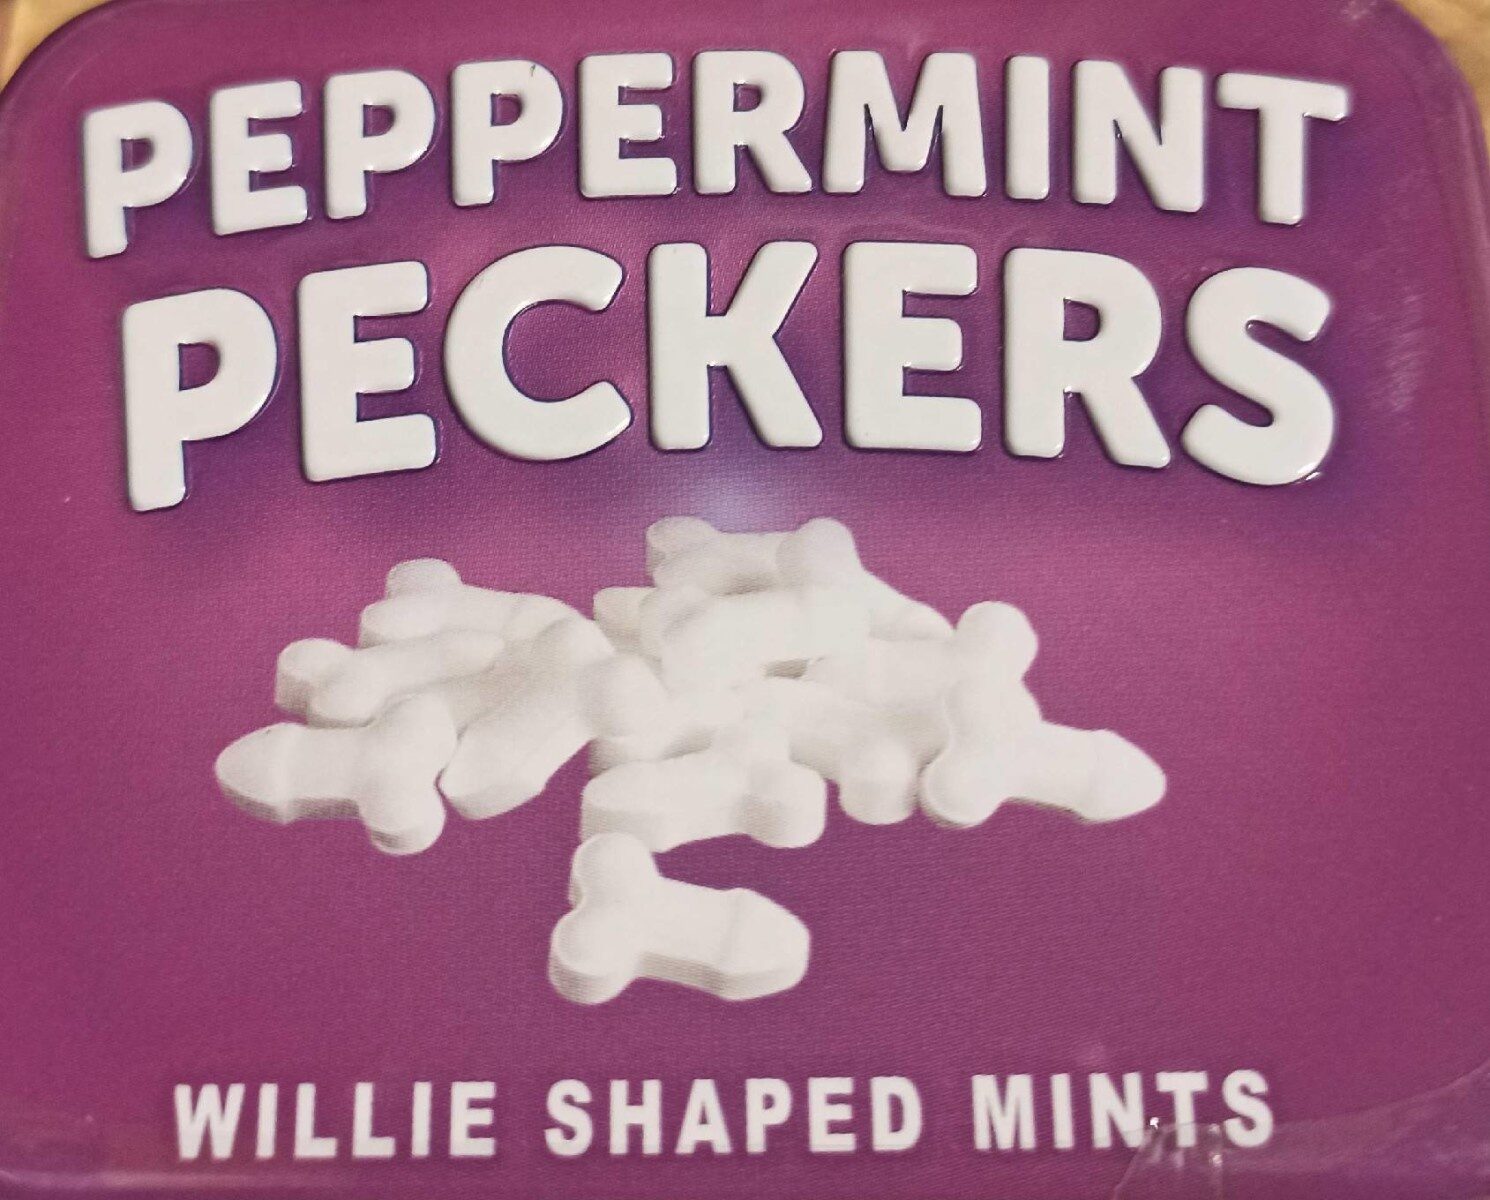 Peppermint peckers - Product